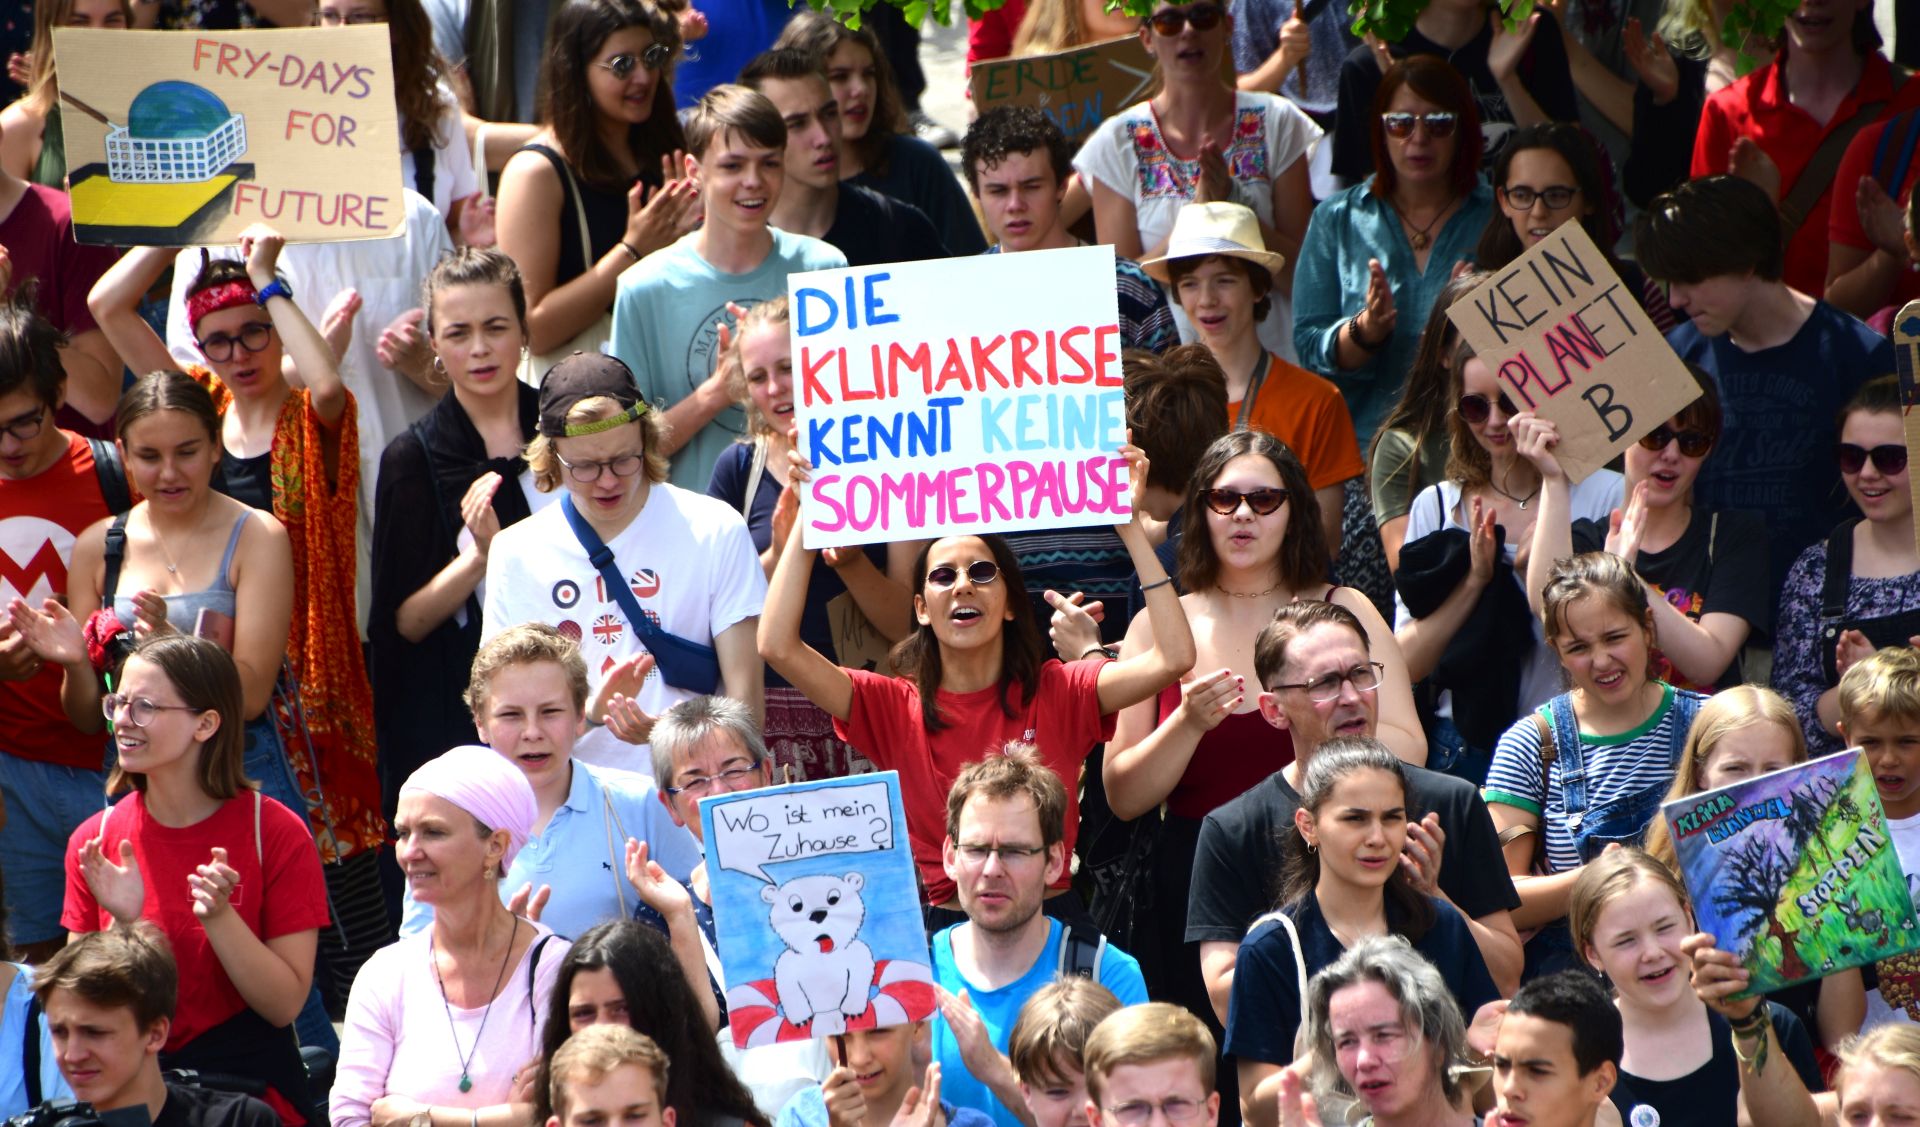 epa07679656 An activist holds a cardboard reading 'the climate crisis knows no summer break', during a 'Fridays for Future' demonstration in Berlin, Germany, 28 June 2019. The growing 'Fridays for Future' movement, which started in the summer of 2018, demands compliance with the goals of the Paris Agreement and the 1.5 degree Celsius target.  EPA/CLEMENS BILAN